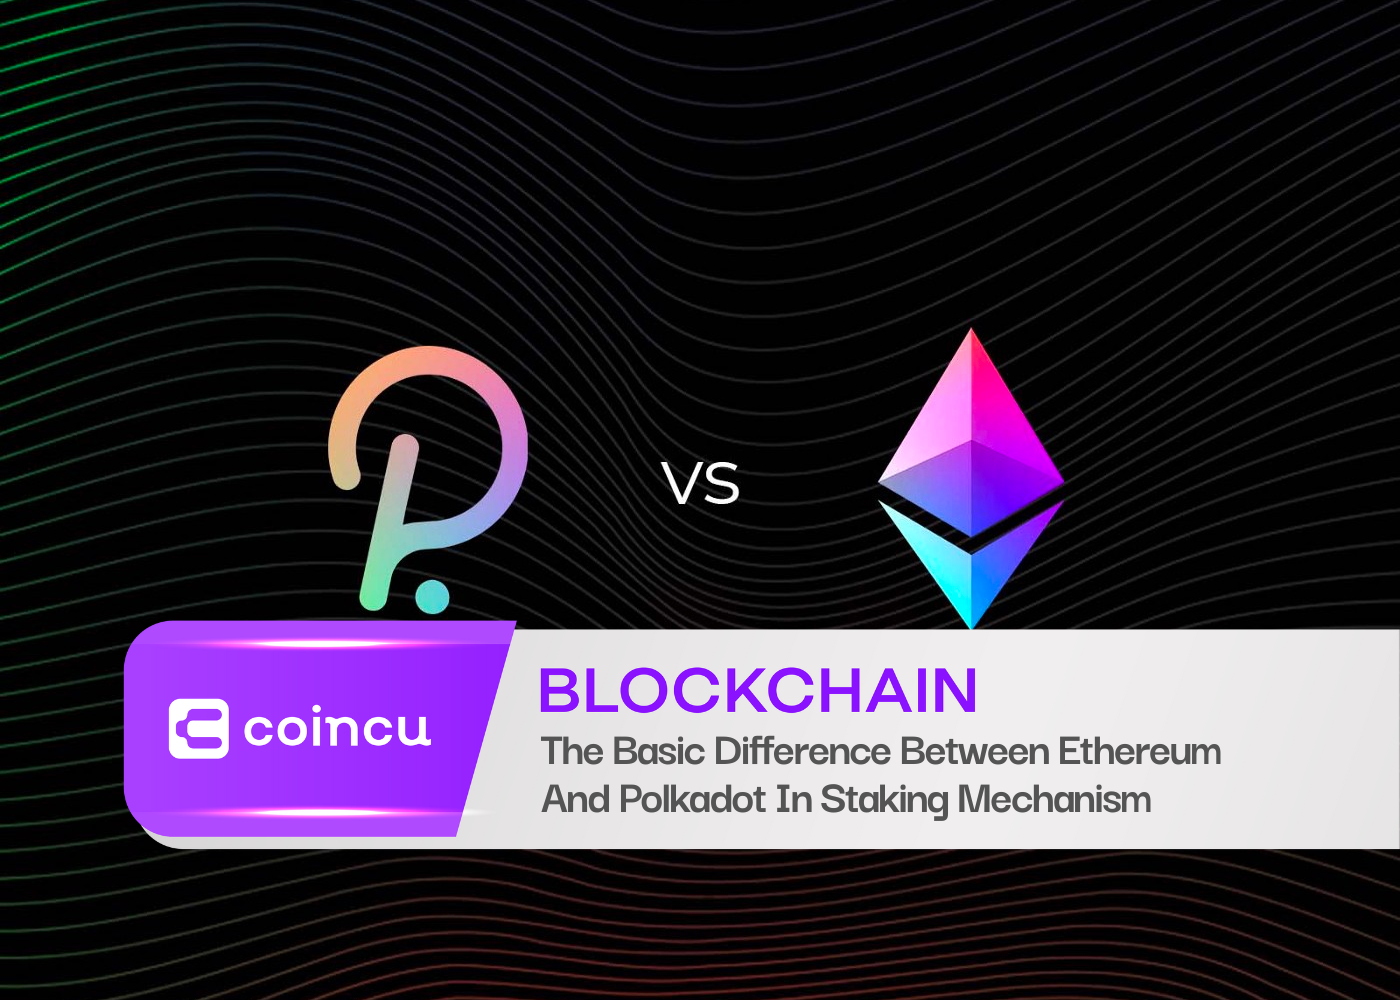 The Basic Difference Between Ethereum And Polkadot In Staking Mechanism